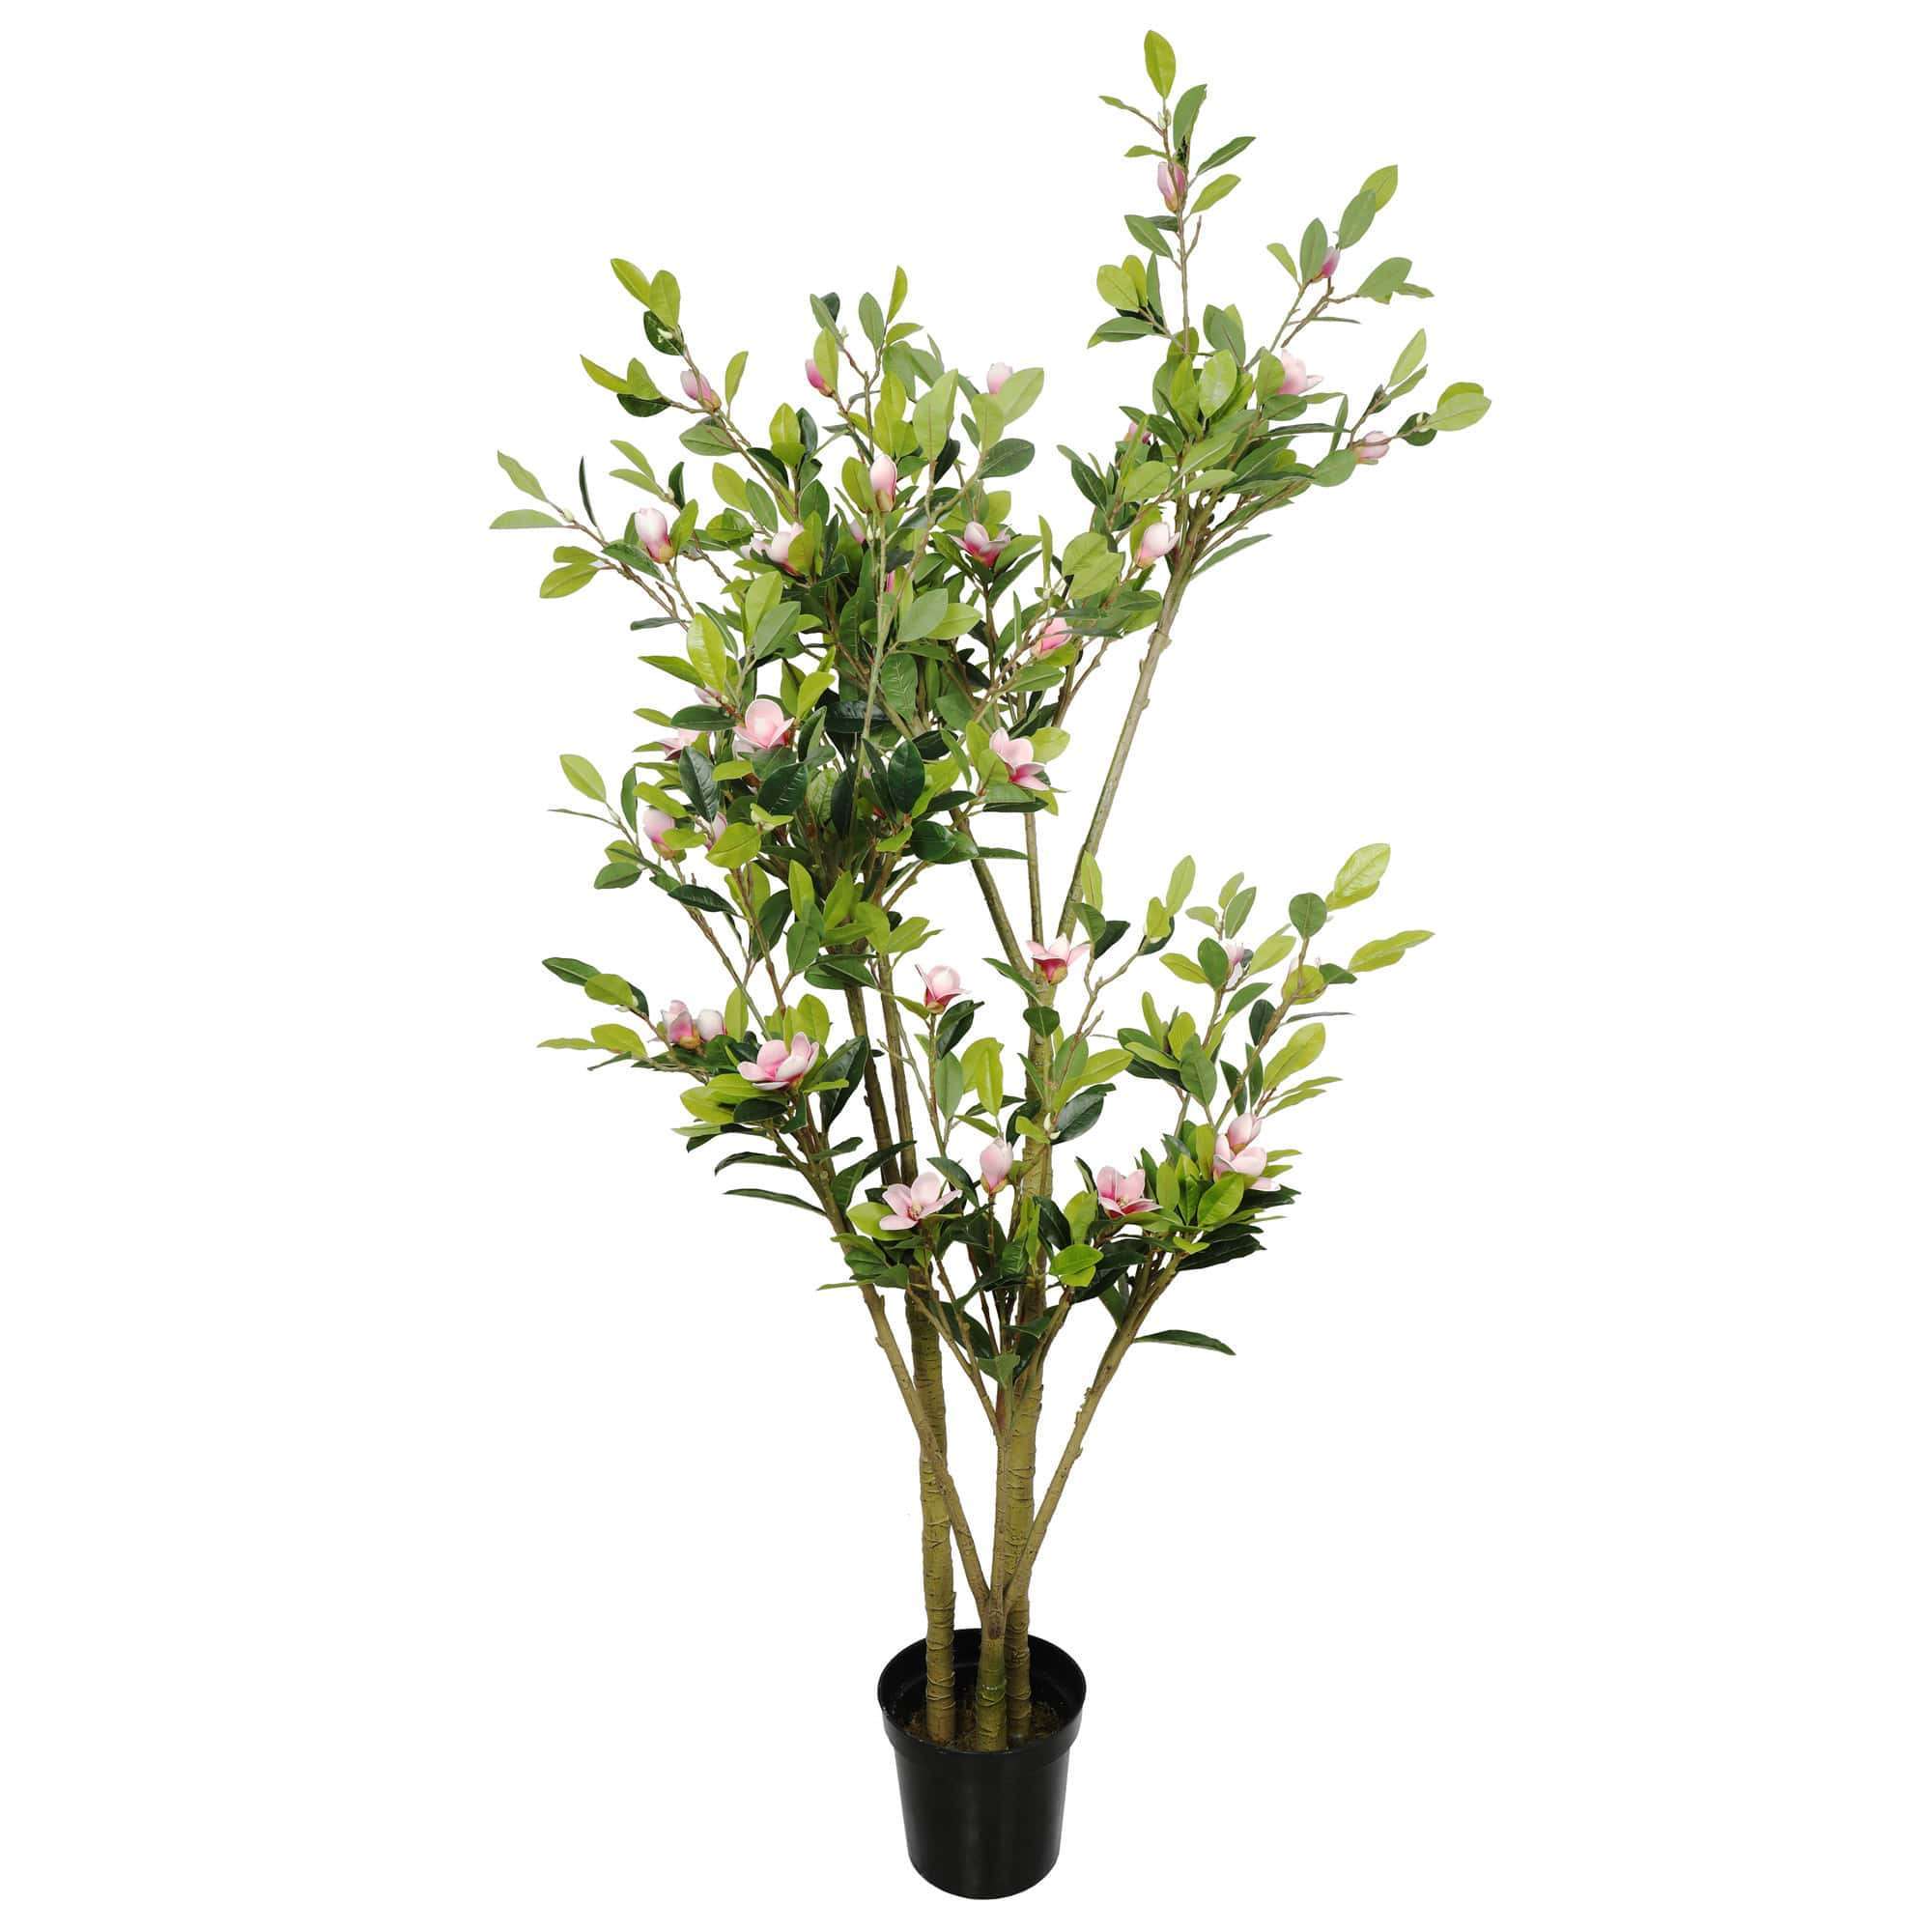 Faux Potted Magnolia Tree with Pink Flowers 250cm - Designer Vertical Gardens Articial Trees artificial green wall sydney